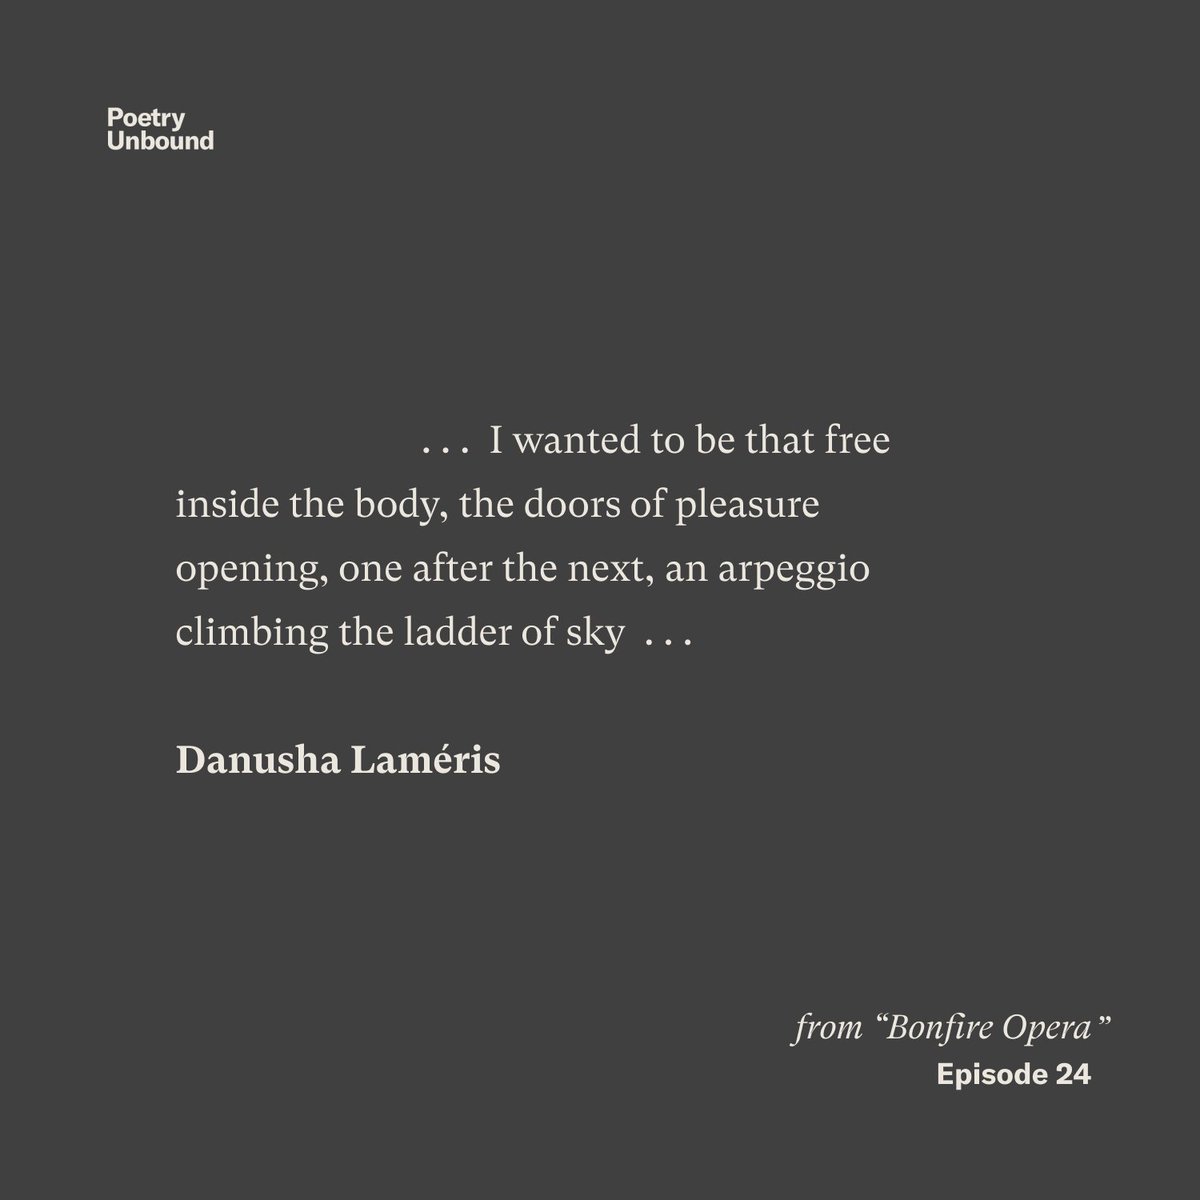 For this season finale of #PoetryUnbound, we offer this poem from @danushalameris. An invitation into the existential limitation of being alive, and into the experiences of beauty and art that enliven us at our limits. 🙏 @upittpress onbeing.org/programs/danus…